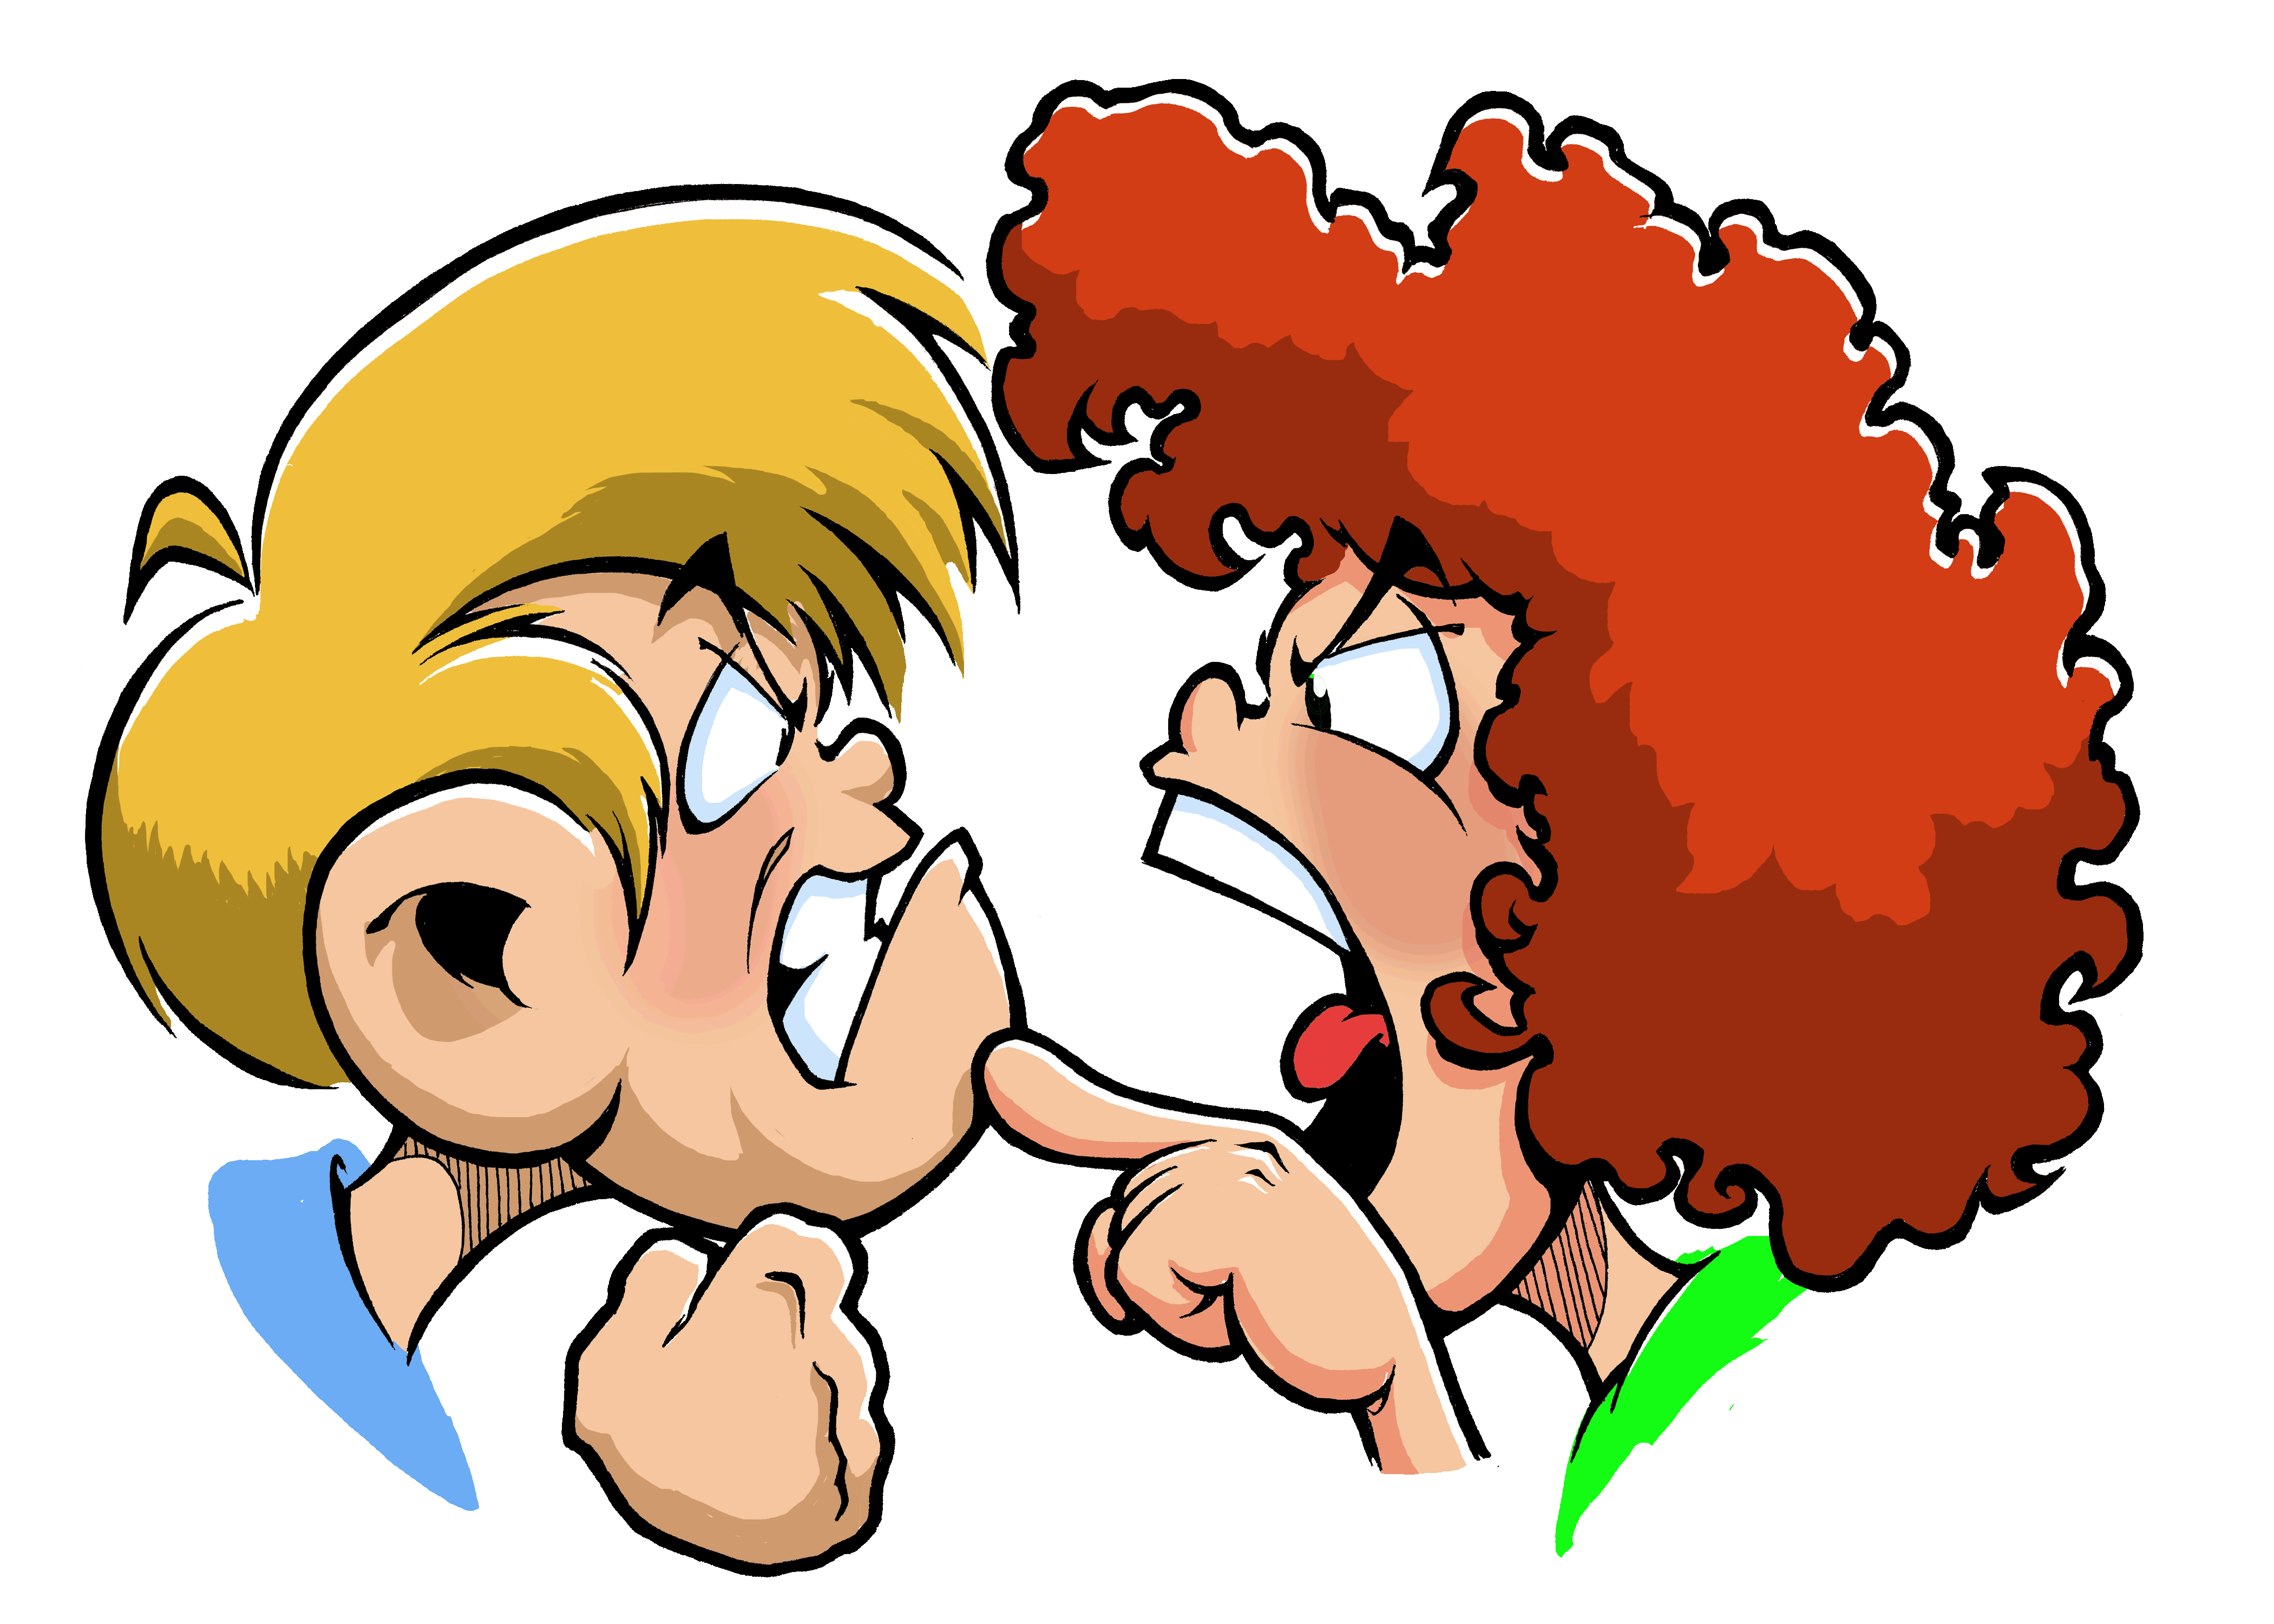 Clip Arts Related To : group of people arguing clipart. 